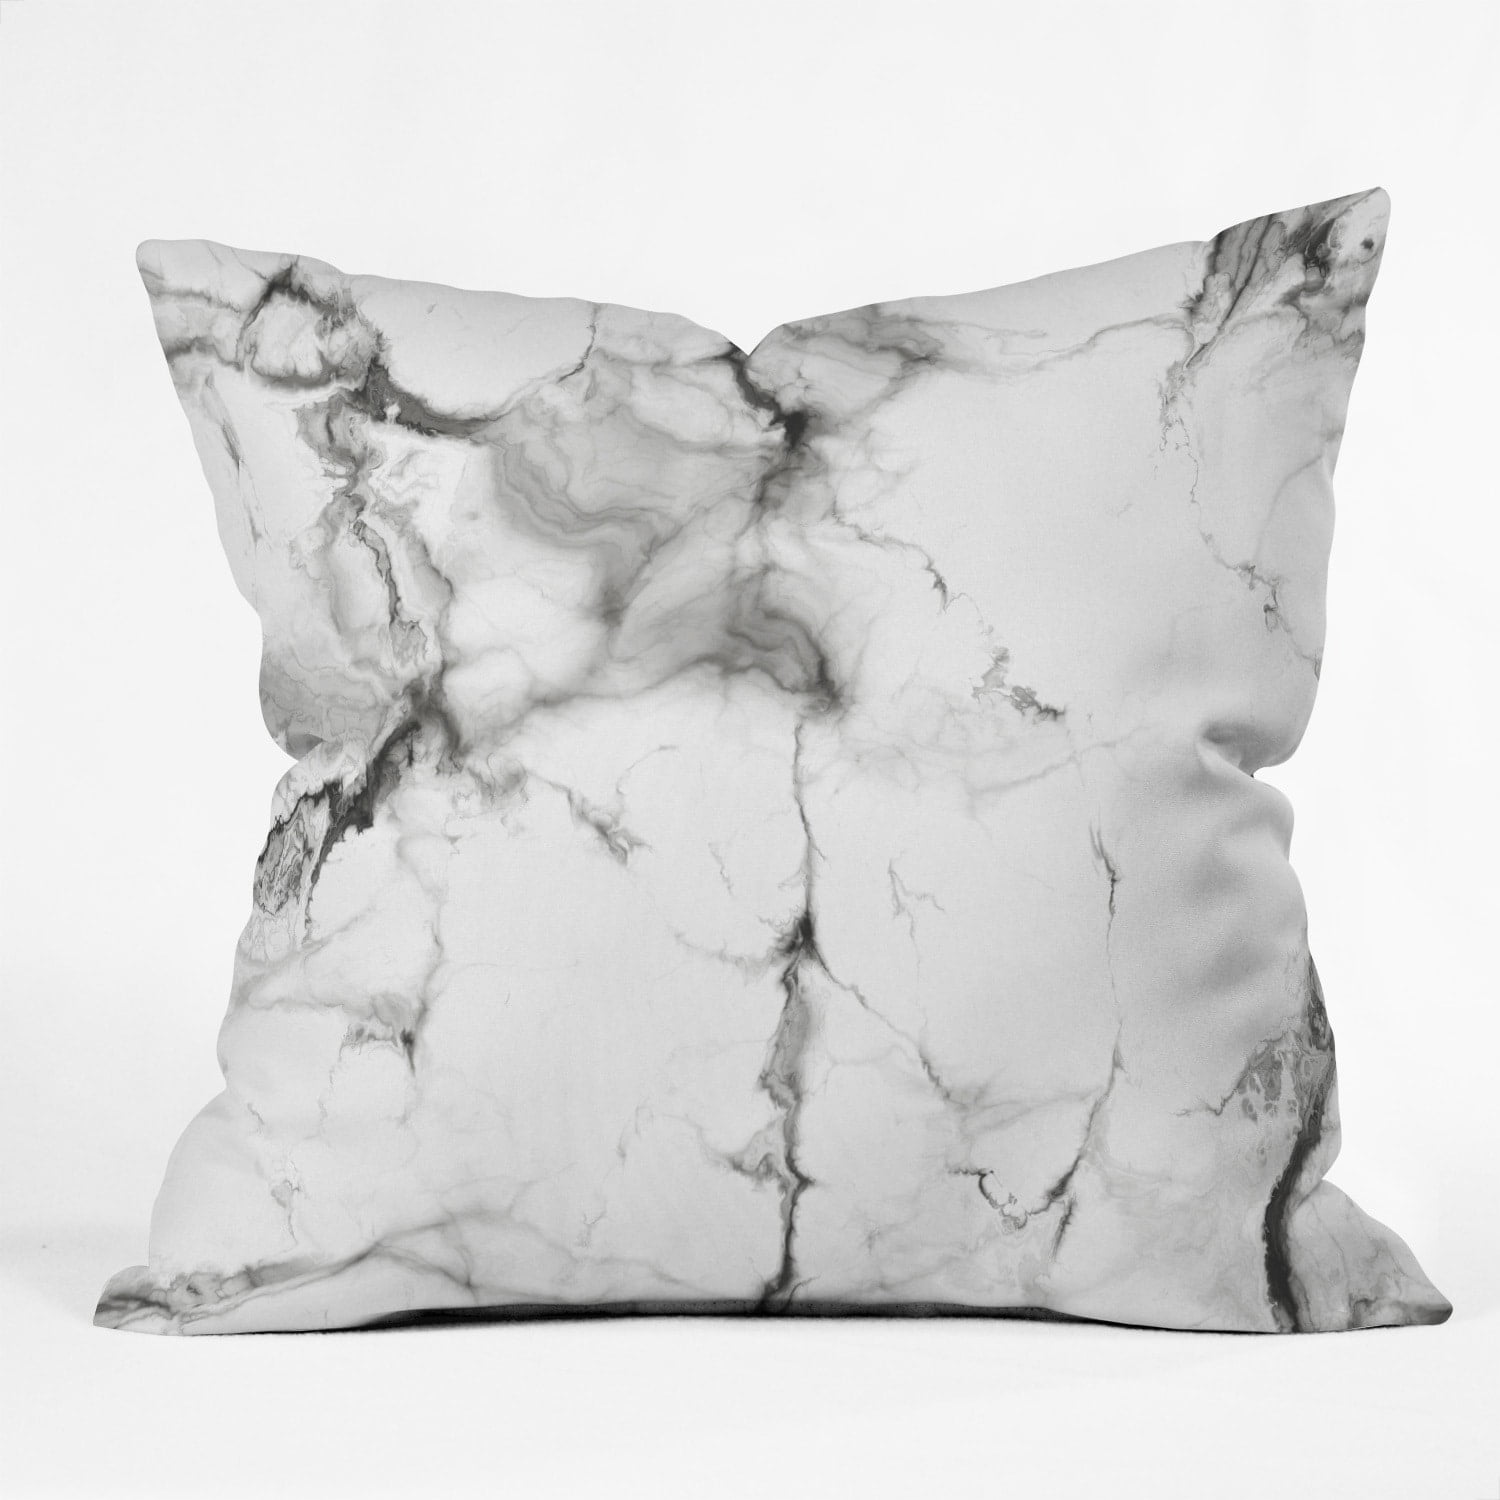 DENY designs Chelsea Victoria White Marble Pillow Cases Set of Two 